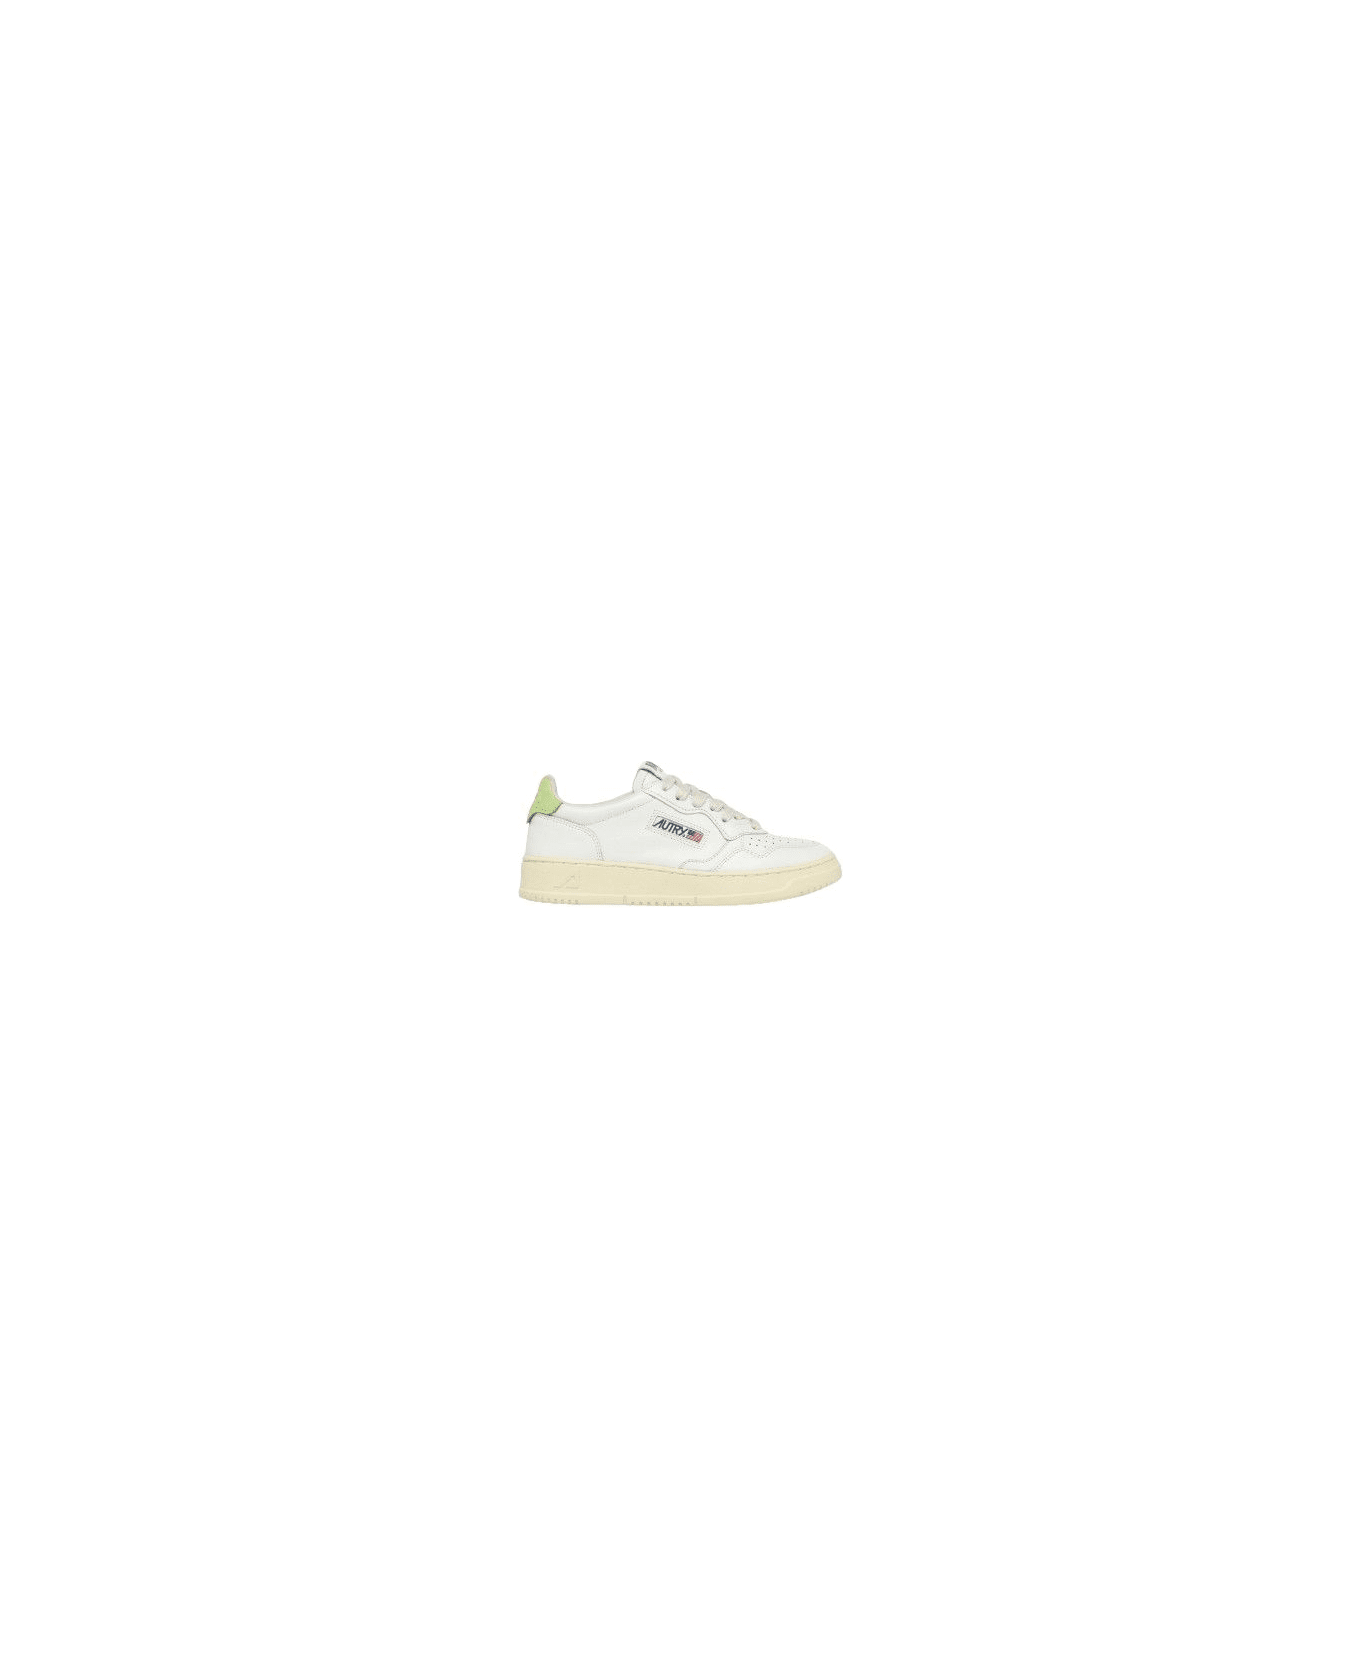 Autry Medalist Low Sneakers - White Snap Green スニーカー